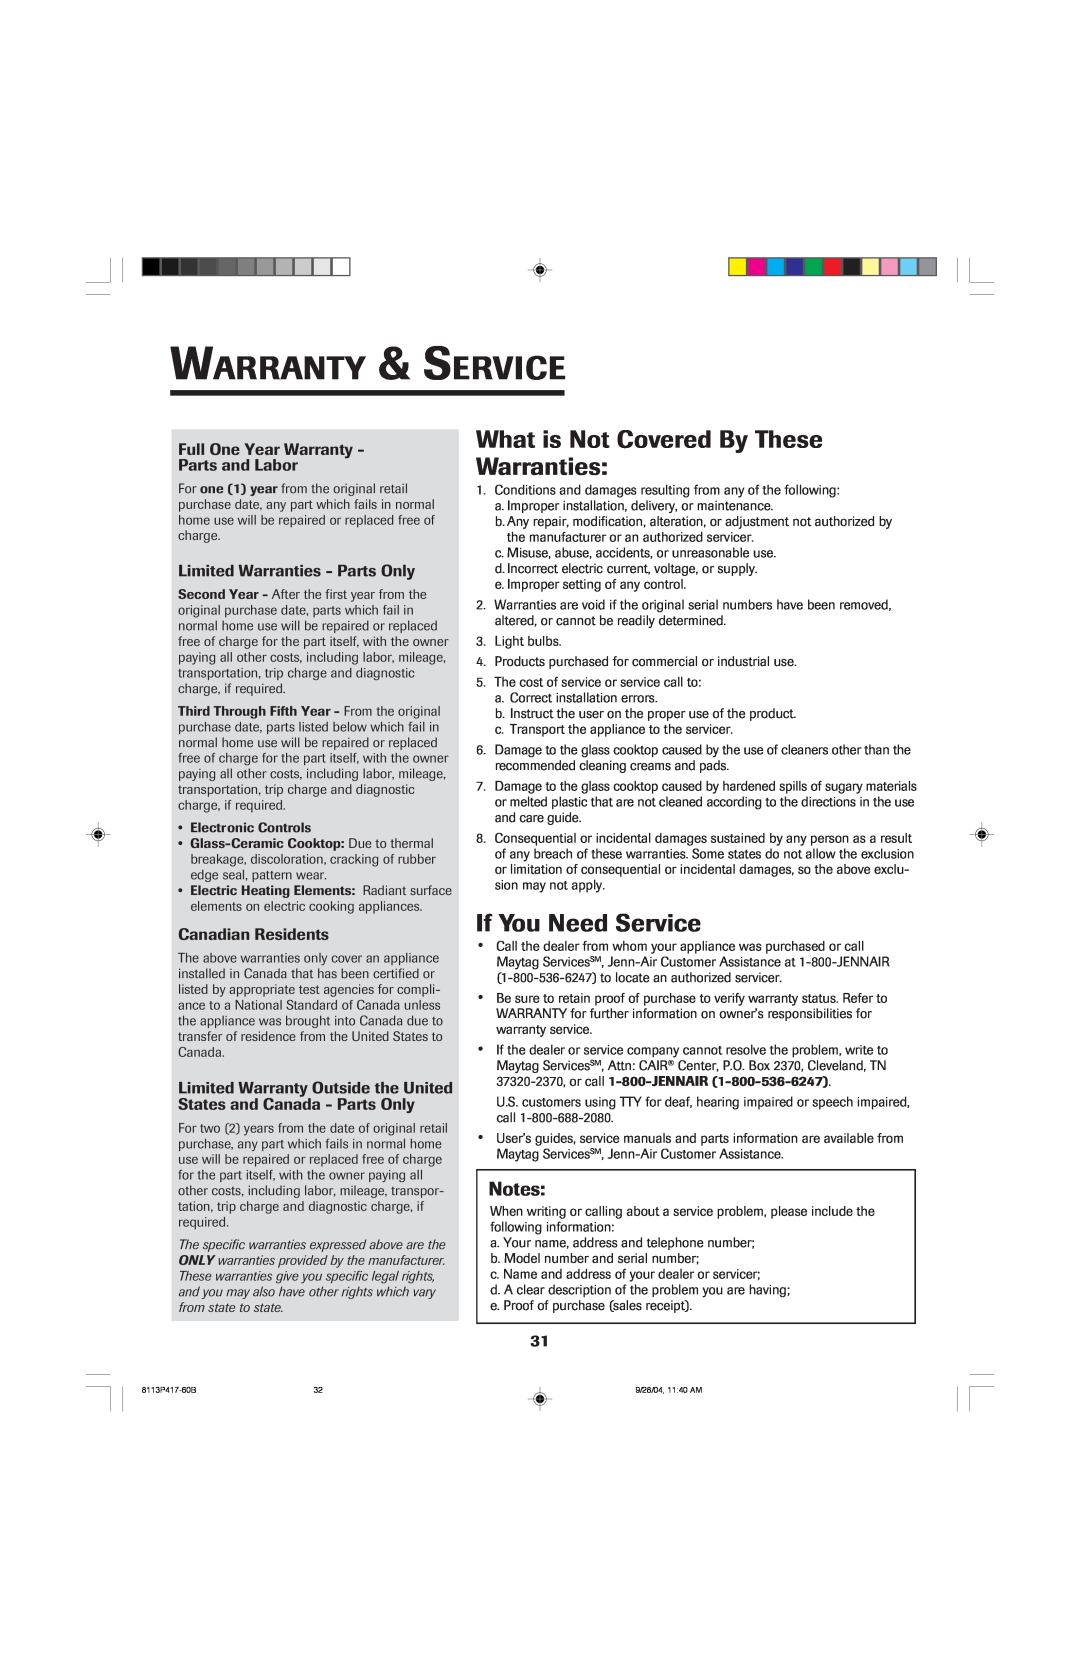 Jenn-Air 800 Warranty & Service, What is Not Covered By These Warranties, If You Need Service, Canadian Residents, Notes 